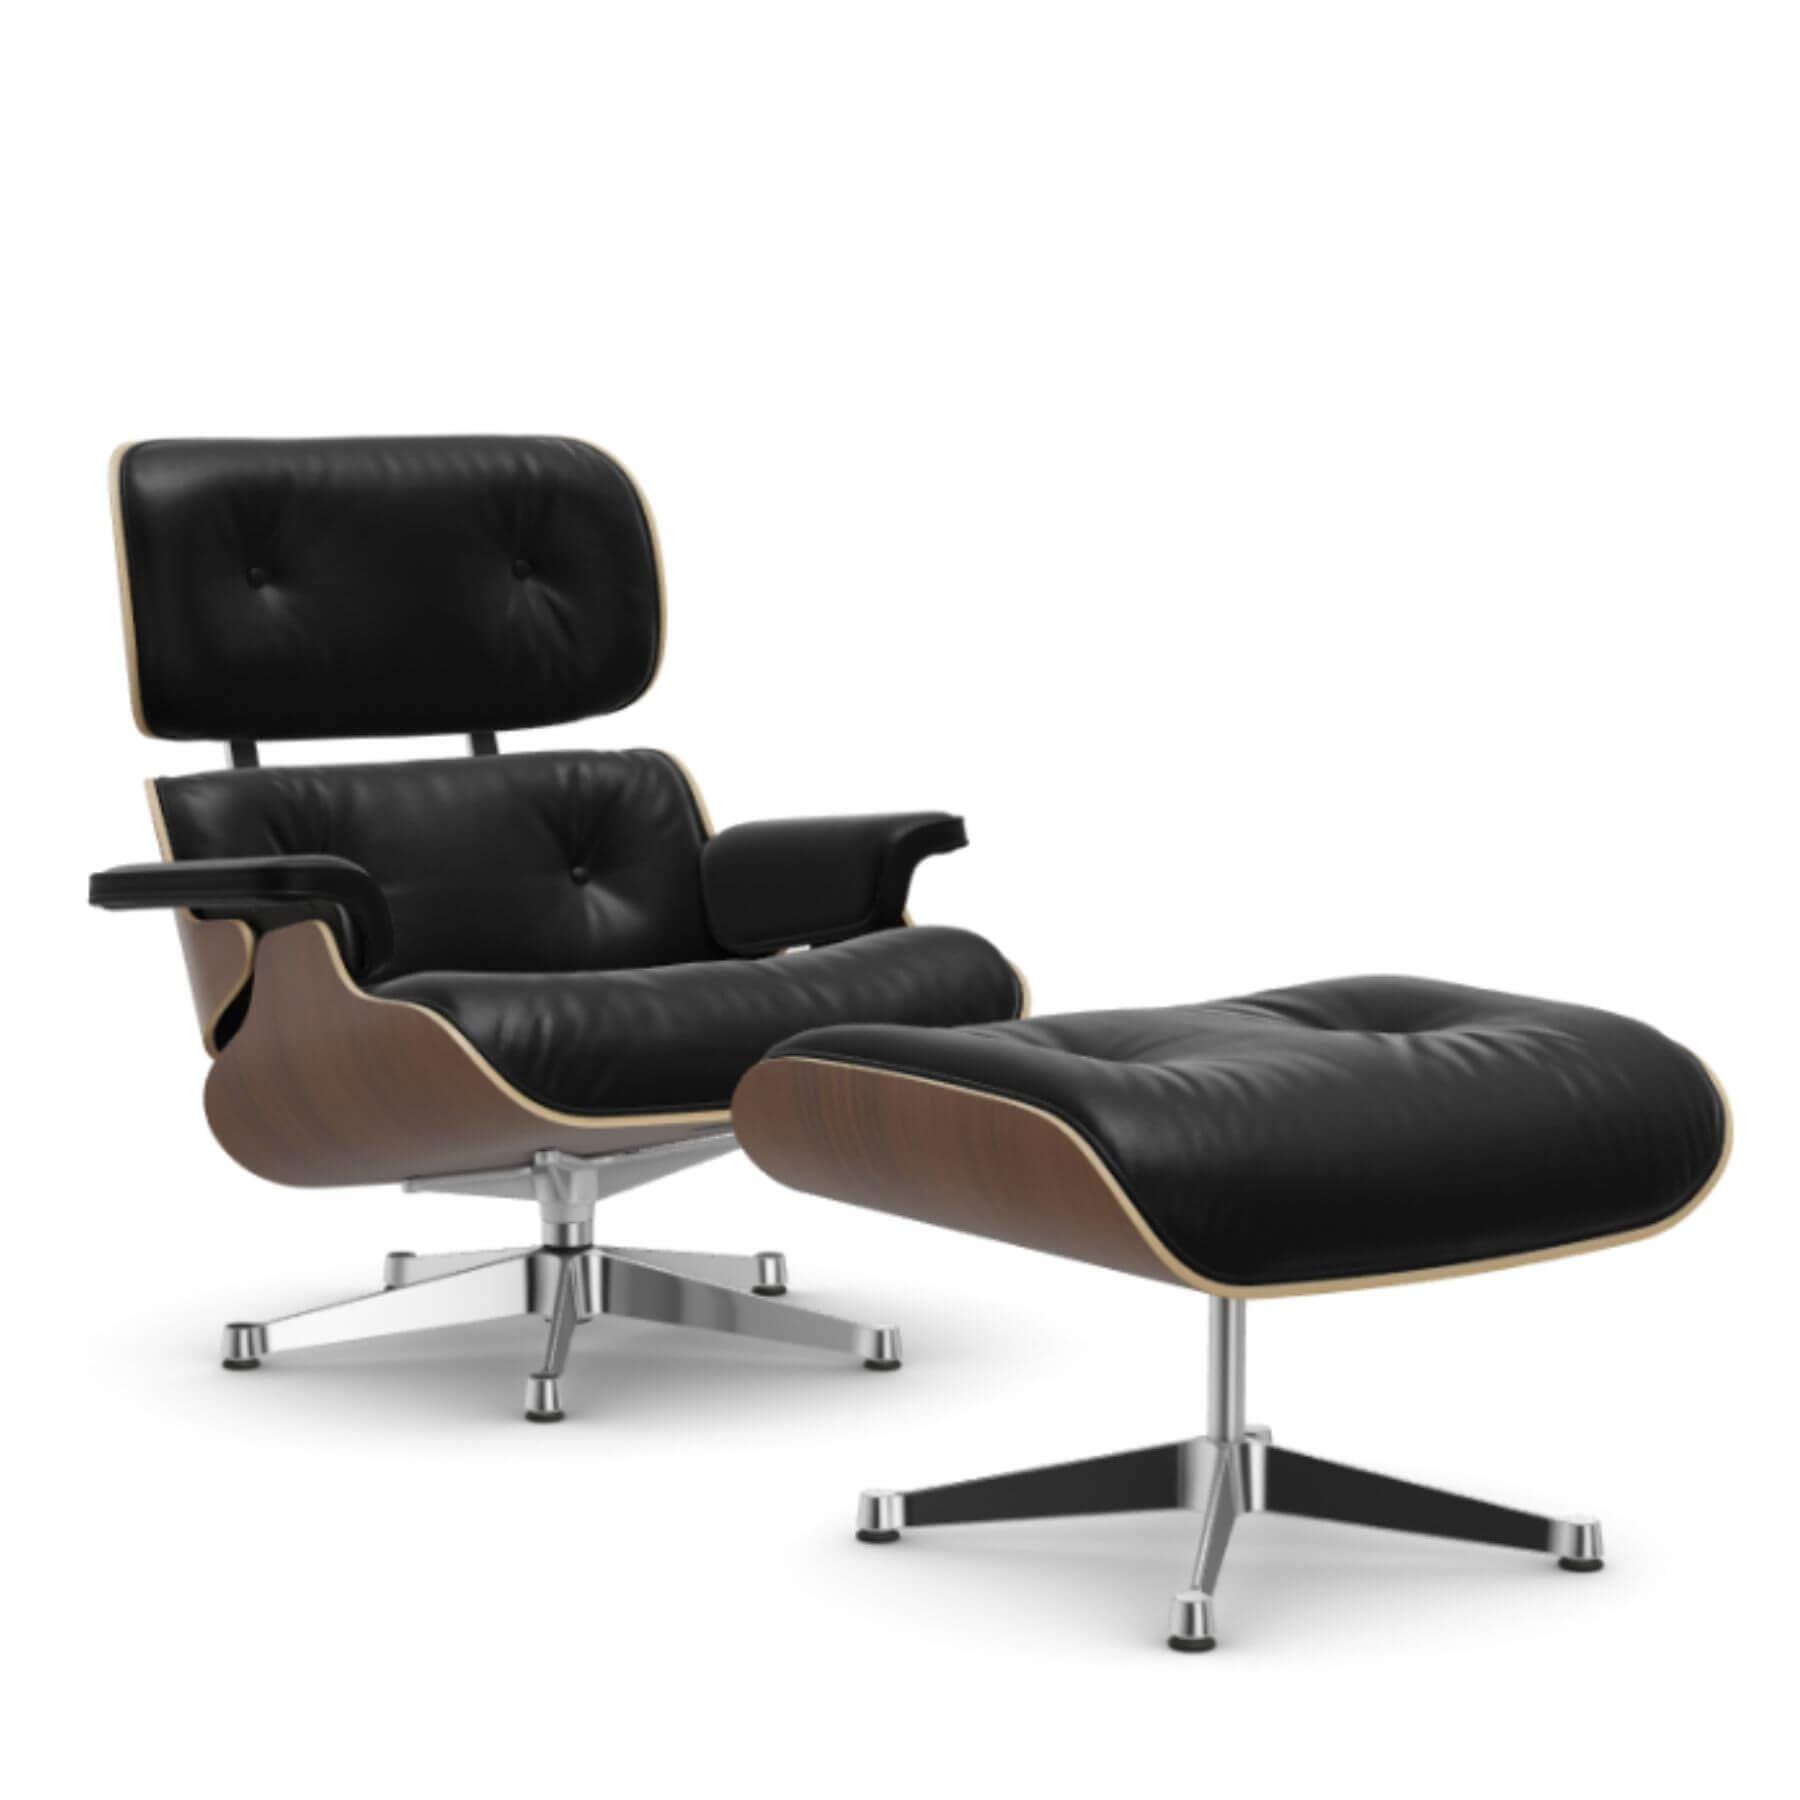 Vitra Eames Lounge Chair Black Pigmented Walnut Leather Natural F Nero Polished Aluminium With Ottoman Dark Wood Designer Furniture From Holloways